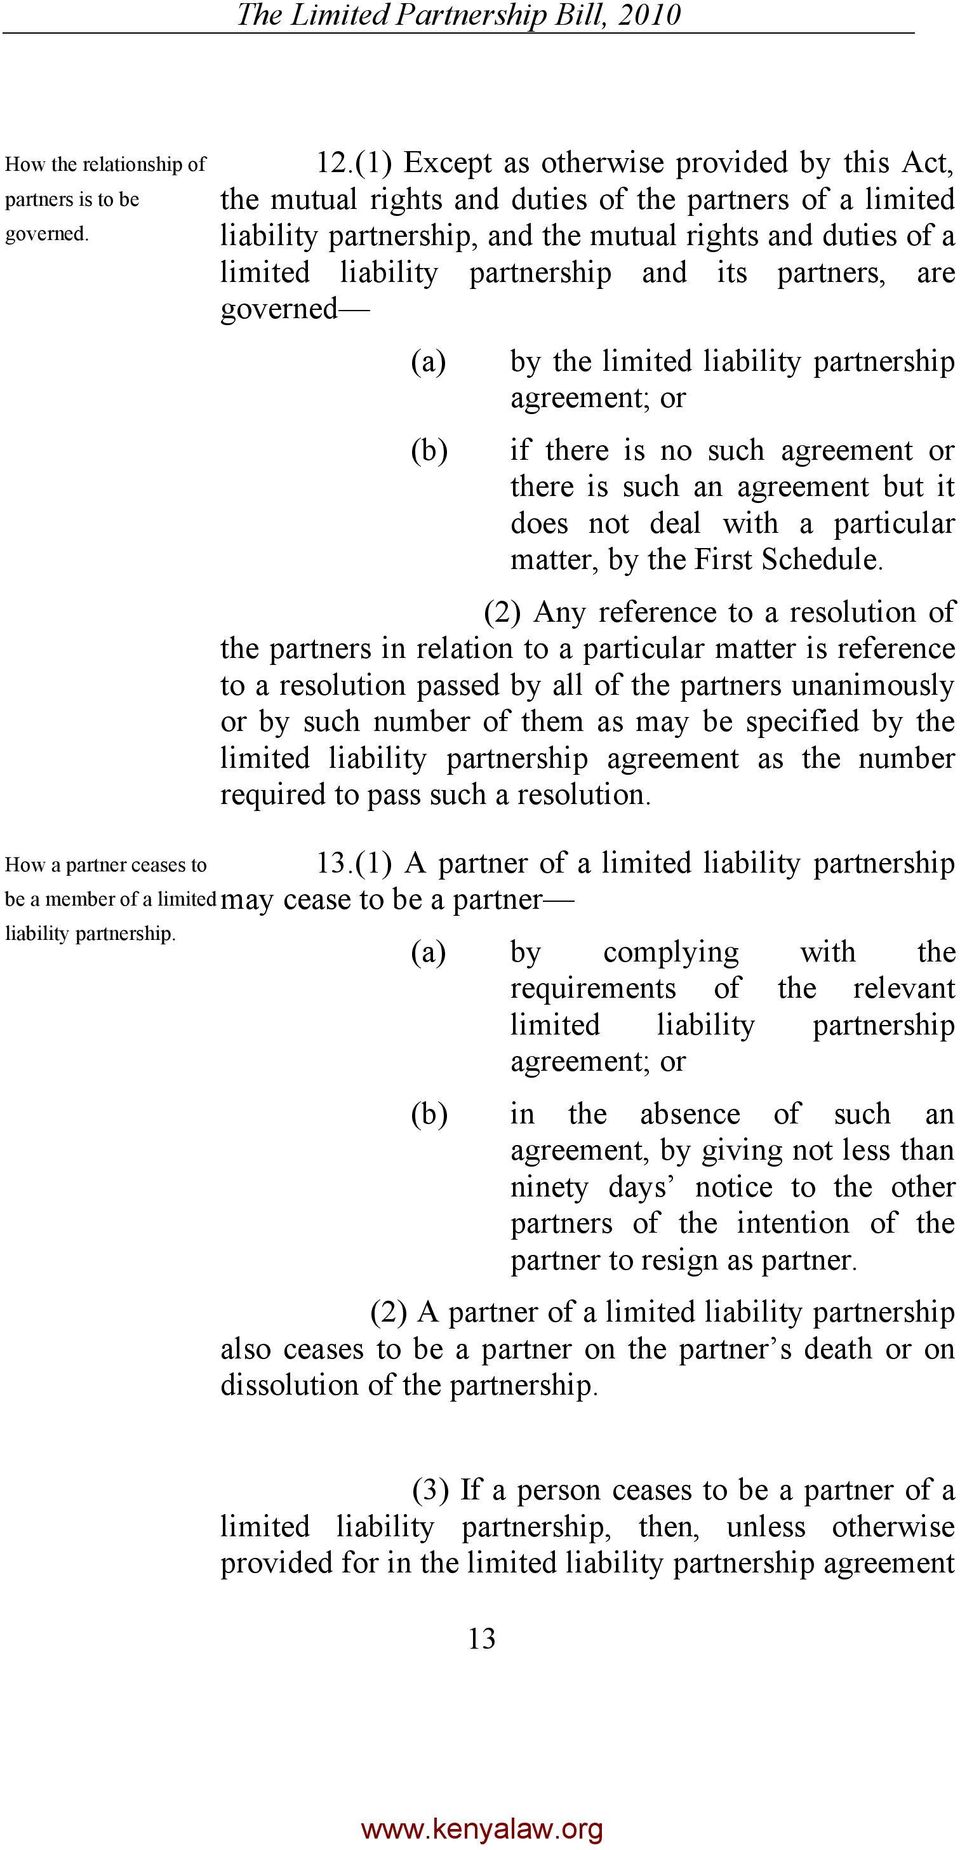 its partners, are governed by the limited liability partnership agreement; or if there is no such agreement or there is such an agreement but it does not deal with a particular matter, by the First